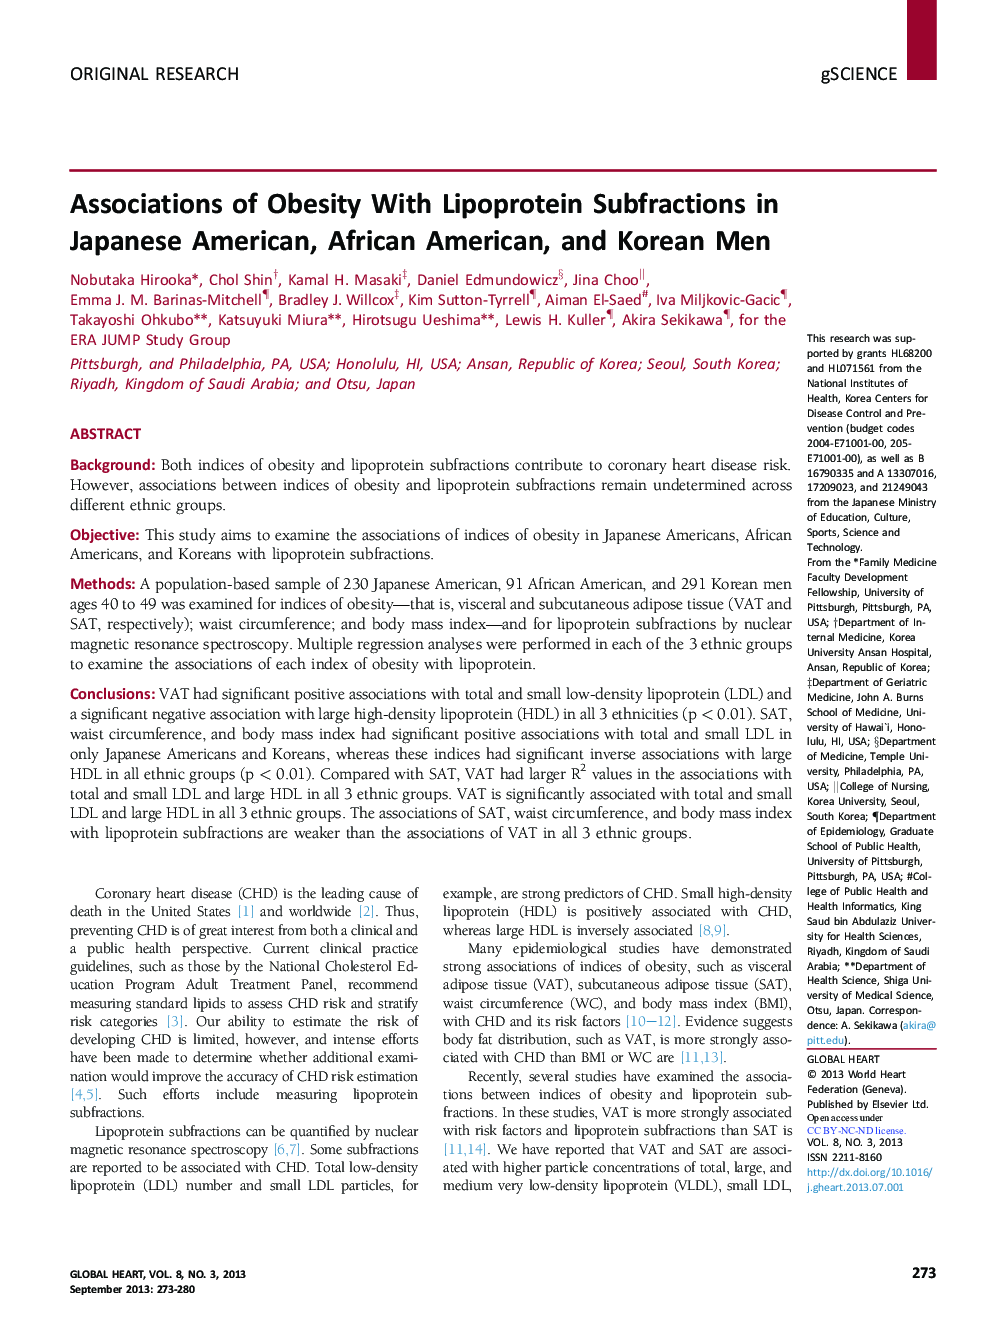 Associations of Obesity With Lipoprotein Subfractions in Japanese American, African American, and Korean Men